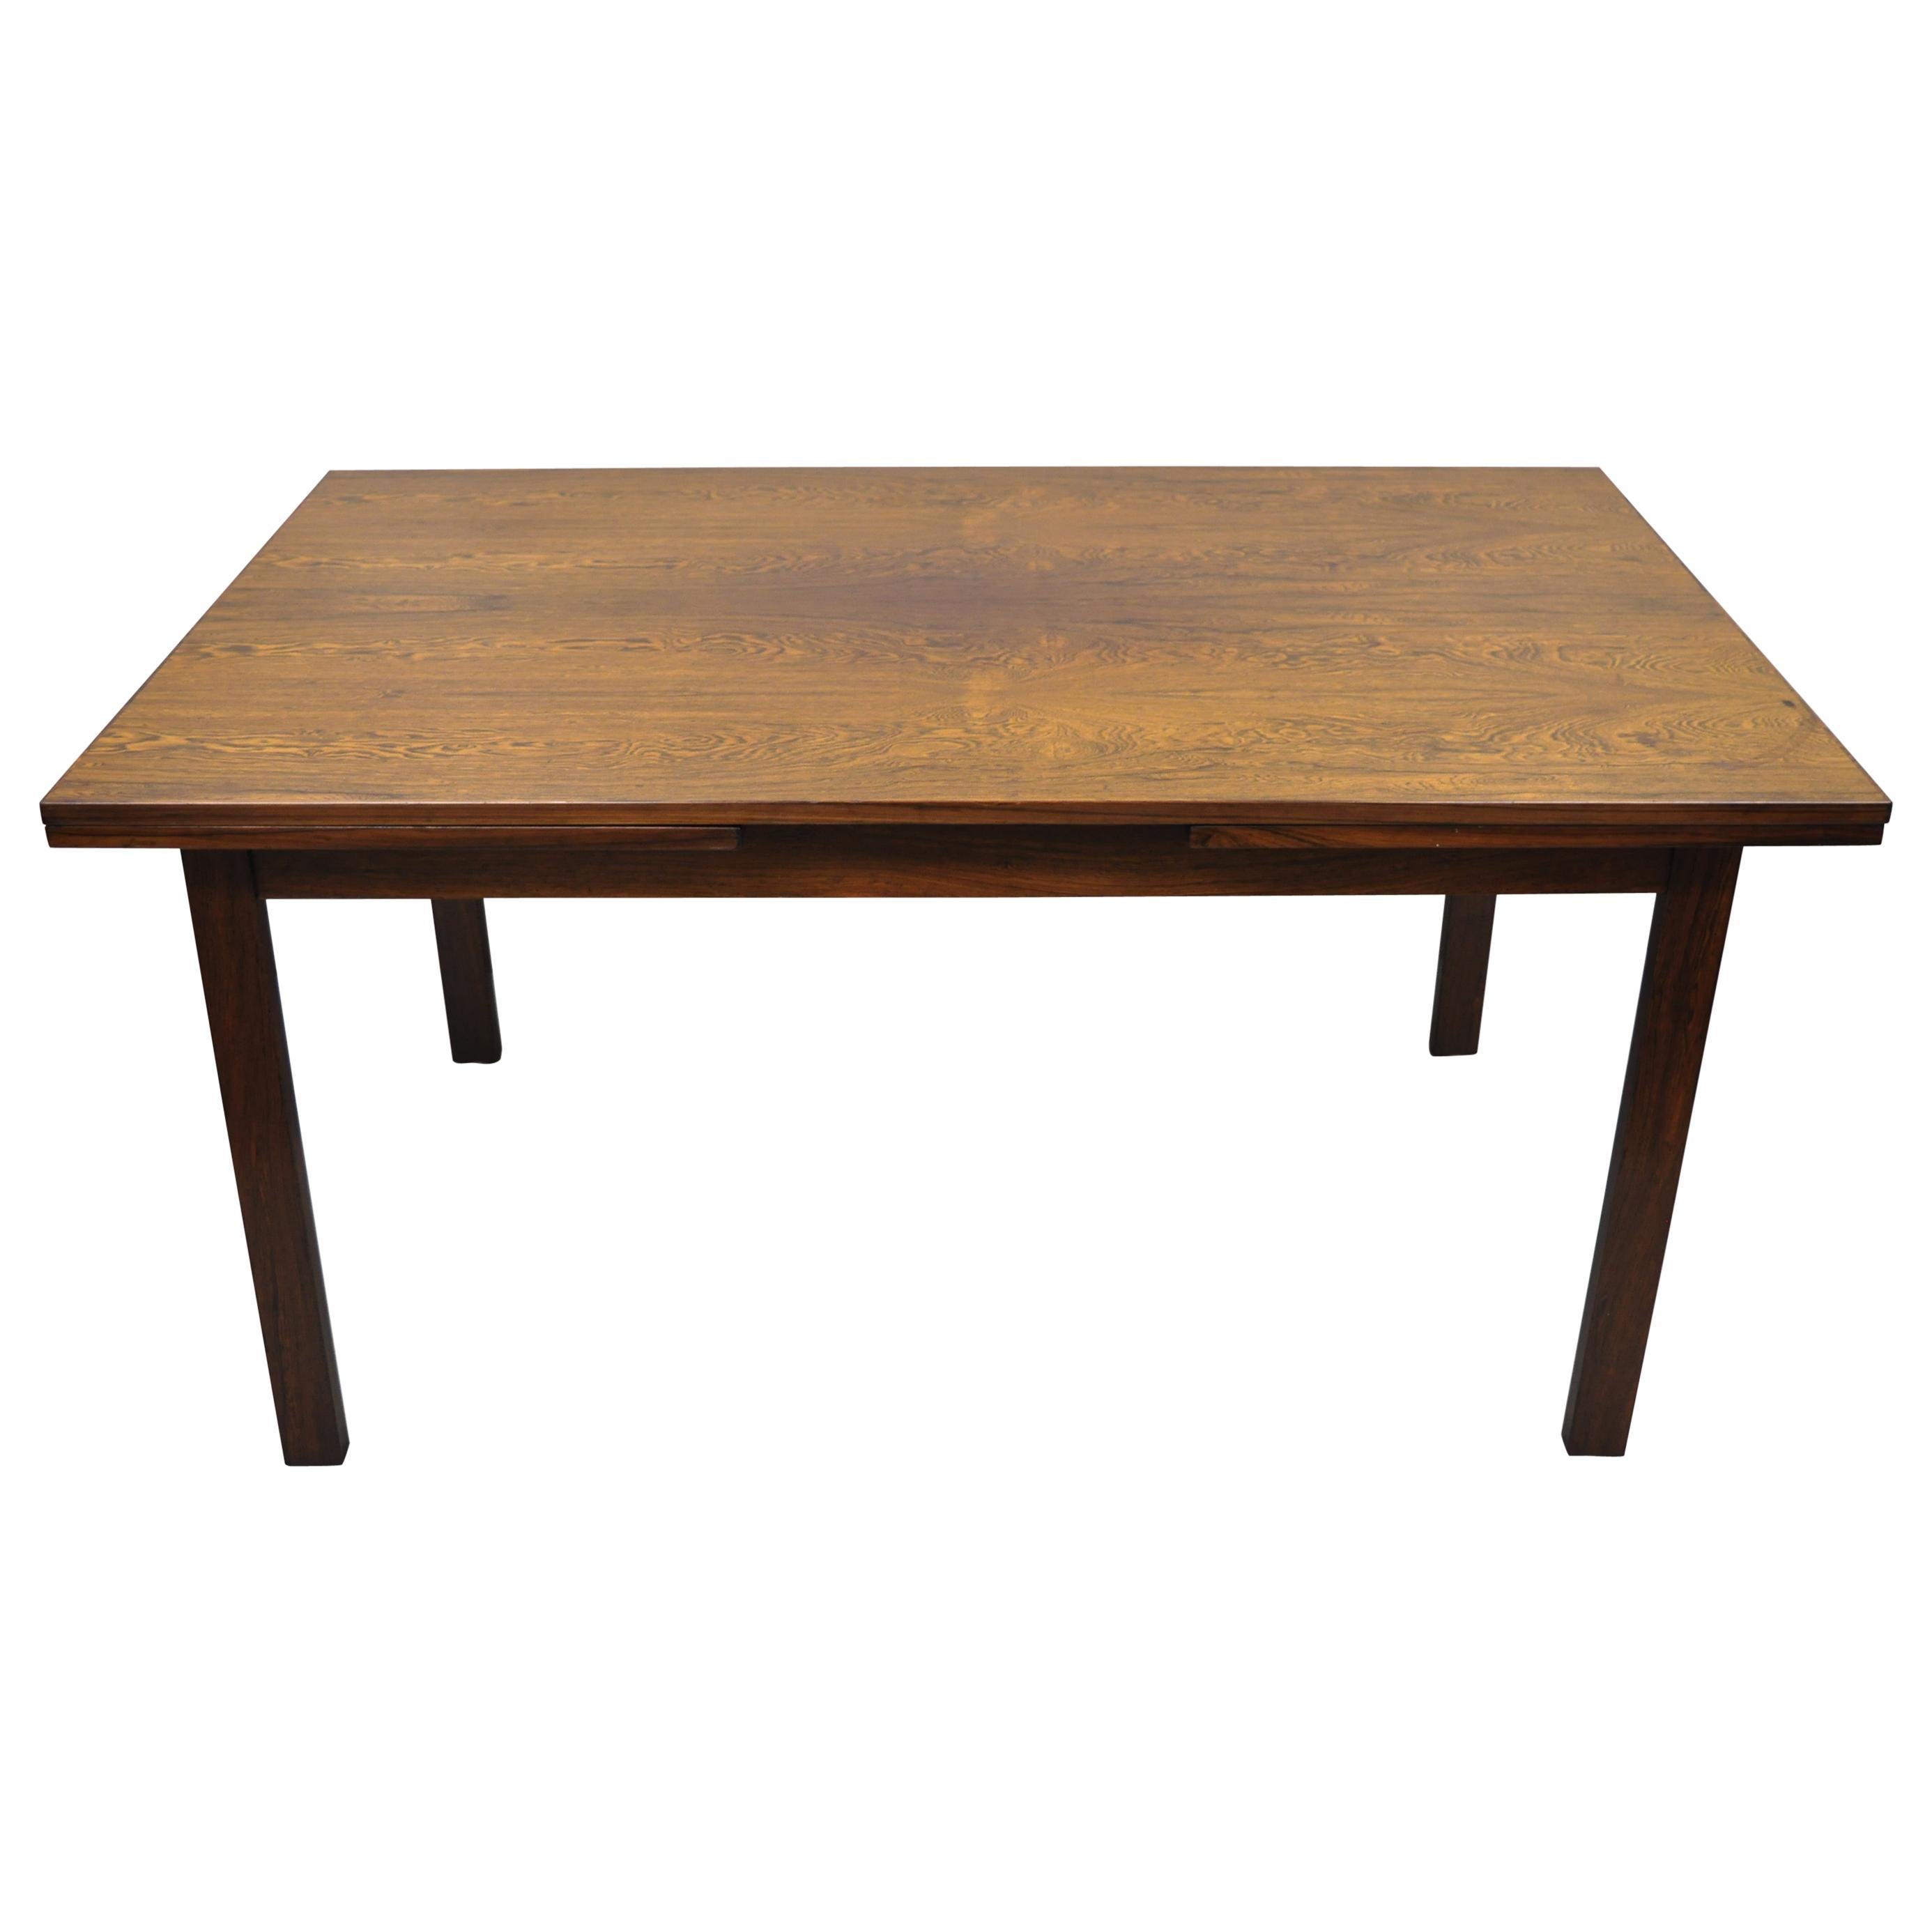 Vintage Midcentury Danish Modern Rosewood Draw Leaf Extension Dining Table